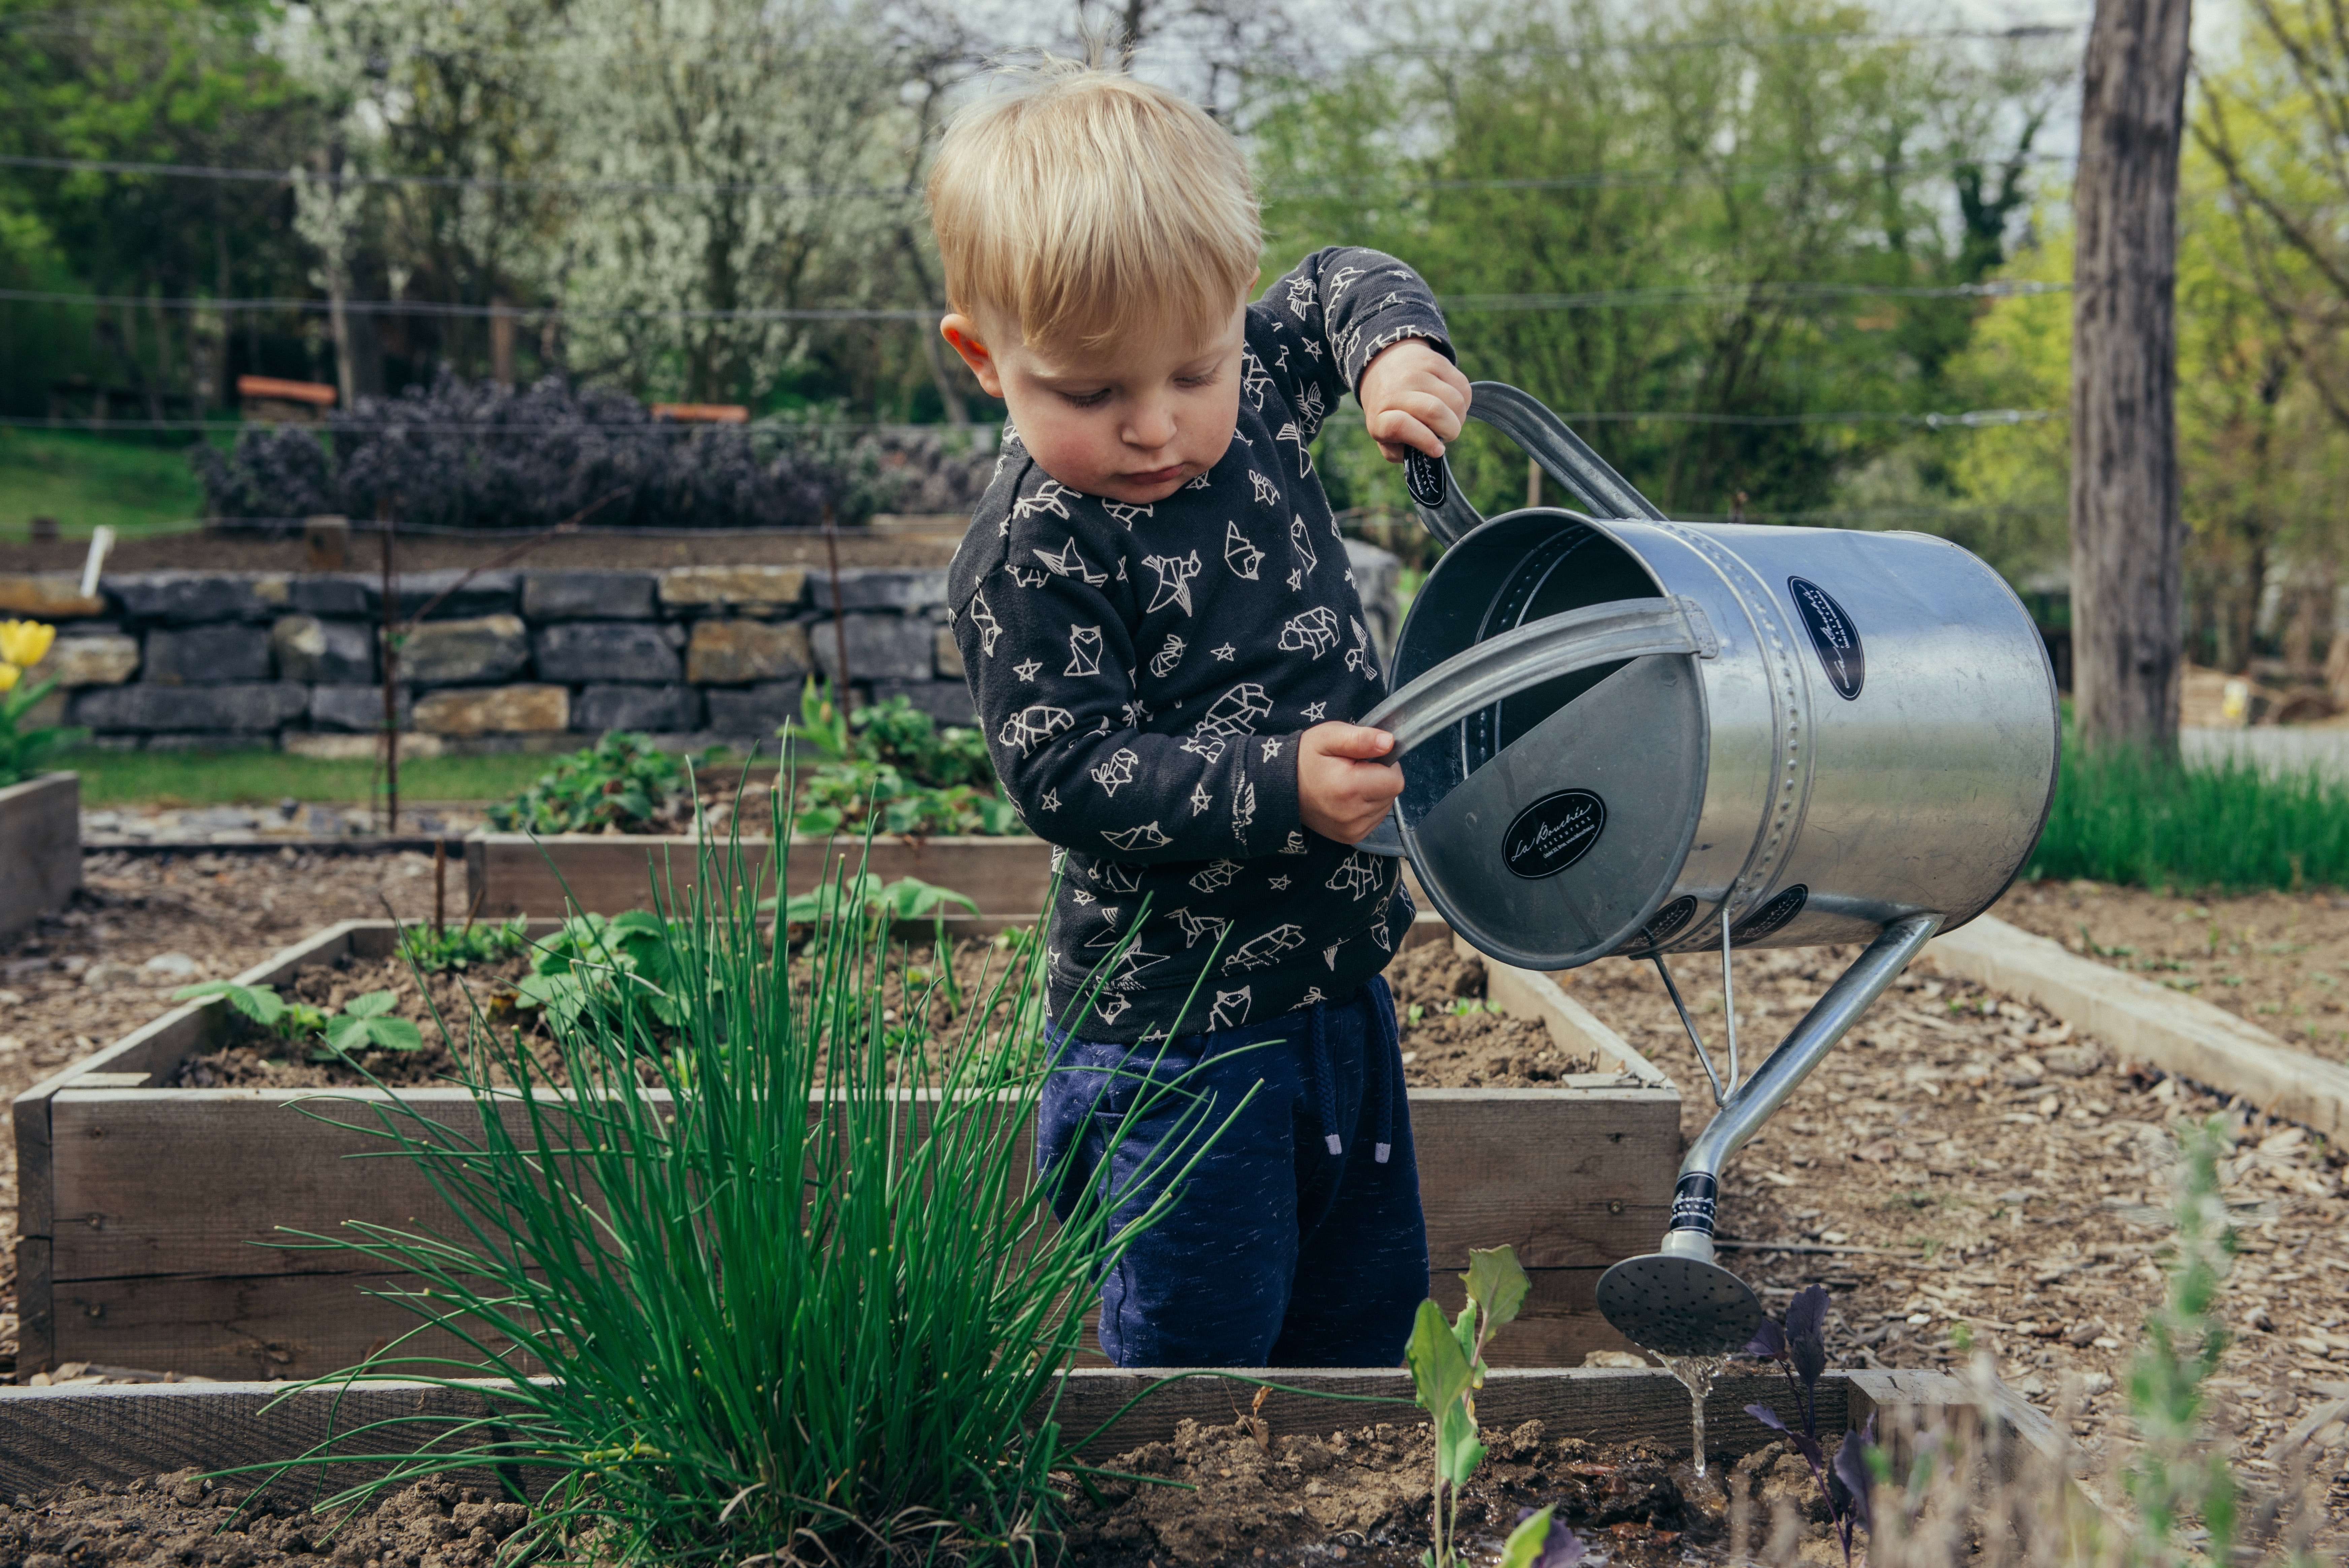 Bay Area preschool student using a watering can